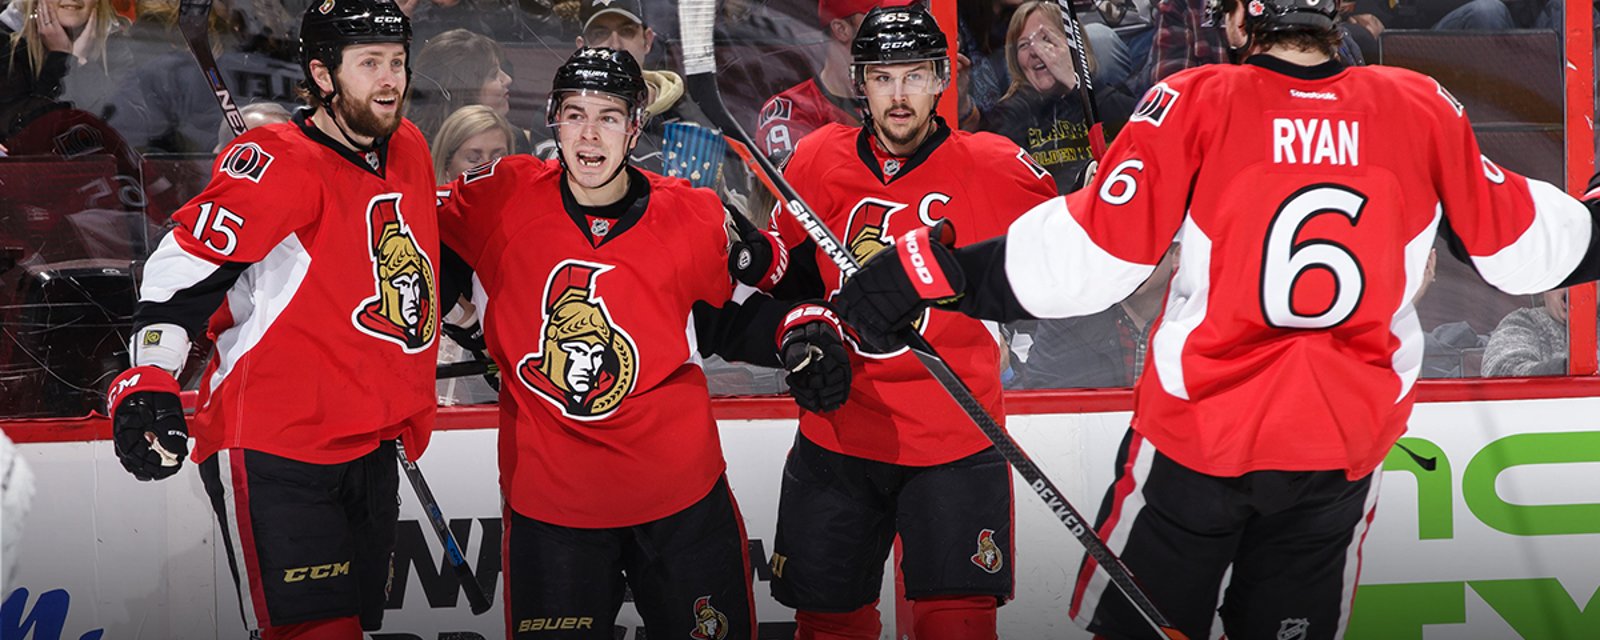 Breaking: Sens player out long-term with personal issues